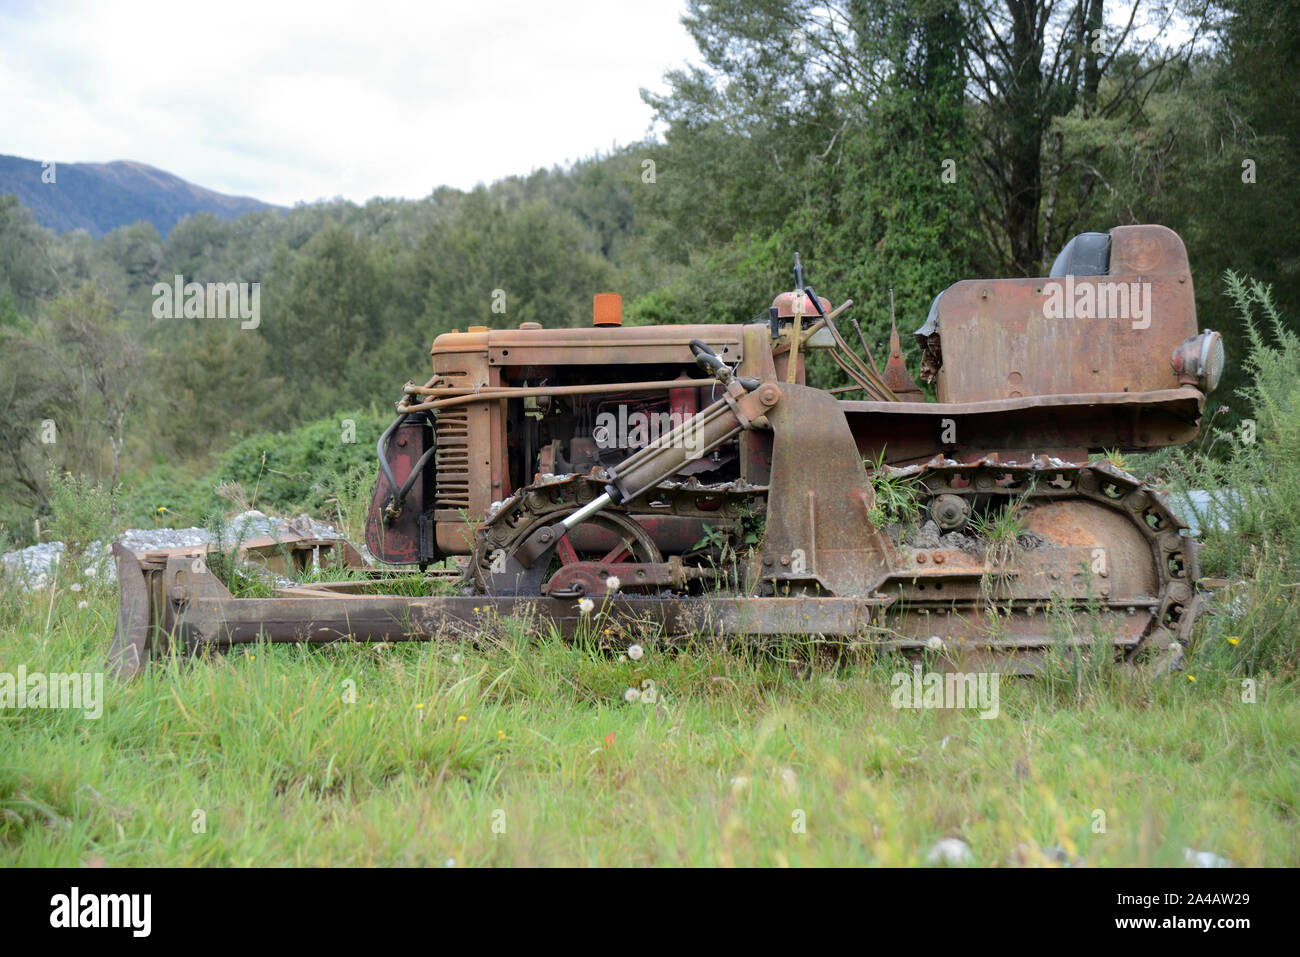 An abandoned dozer rests among large trees on a hillside in New Zealand Stock Photo